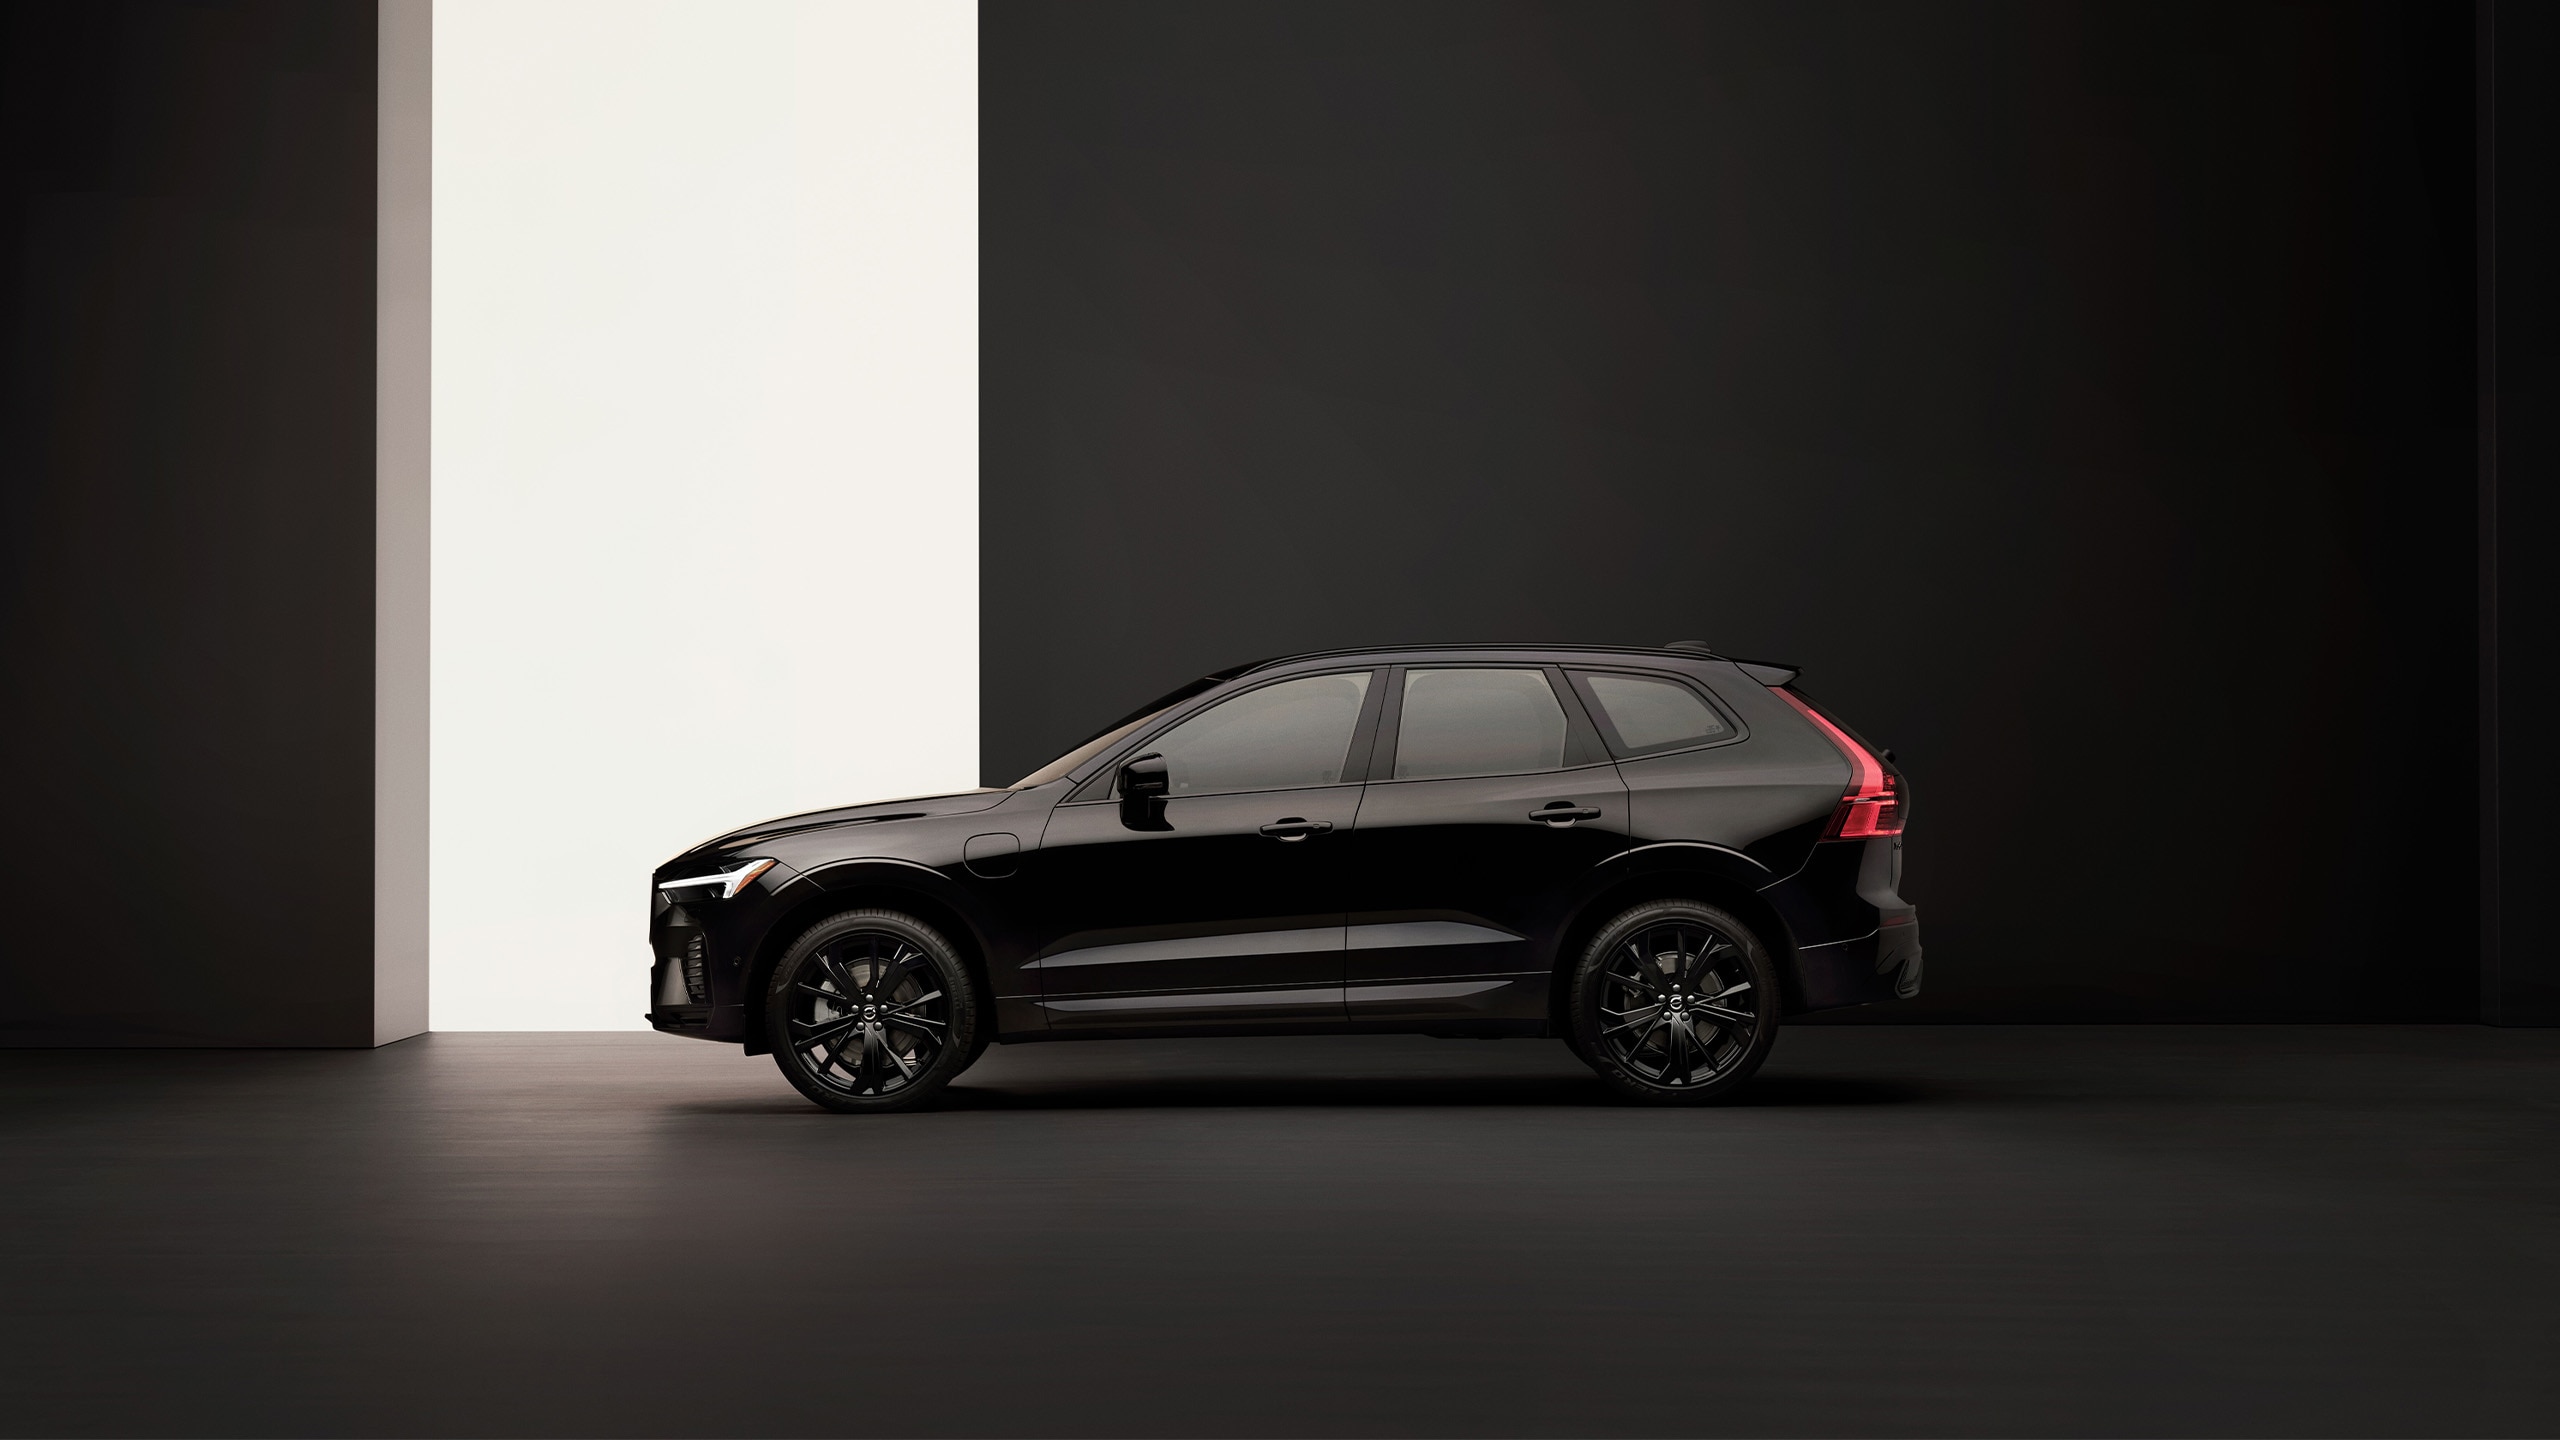 Experience the Volvo Black Edition XC60 SUV - Volvo SUV parked on display